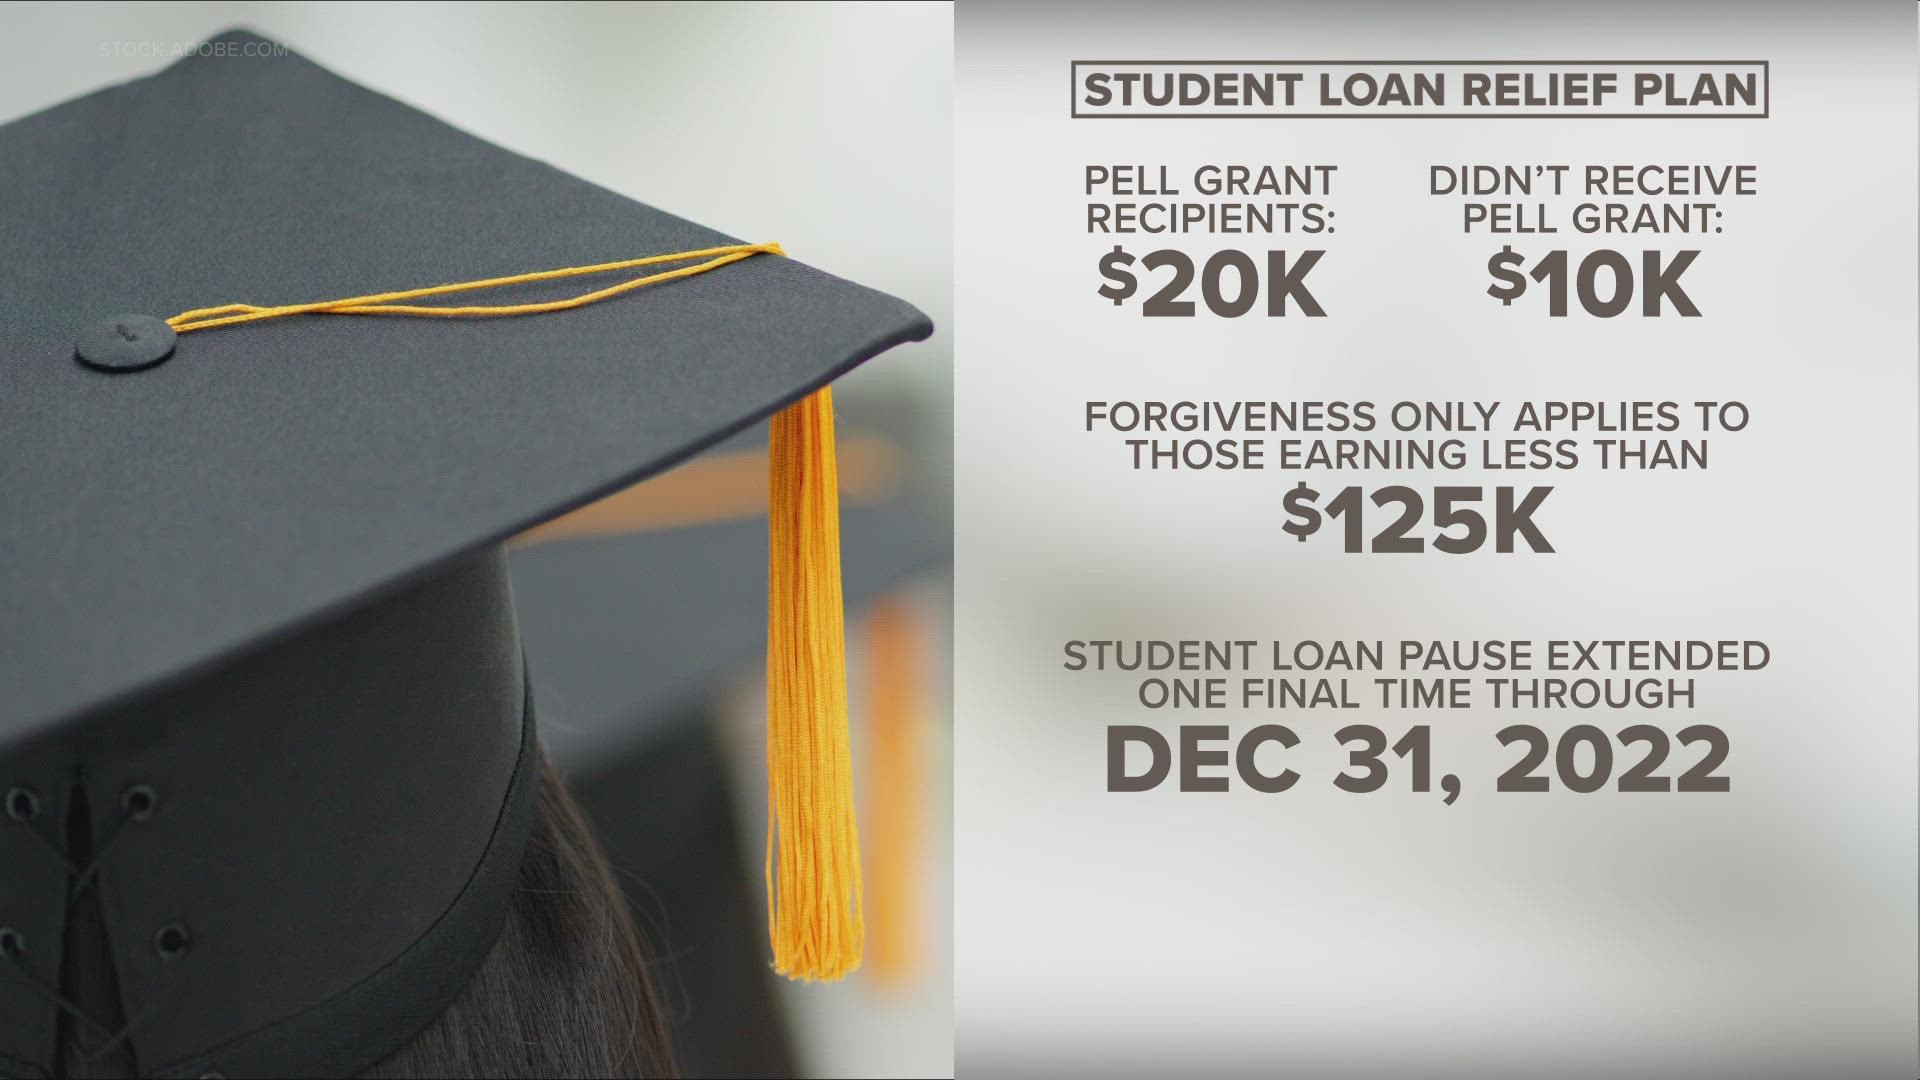 Student loan payments have been paused "one final time" till the end of the year. Information regarding applications will be announced soon.